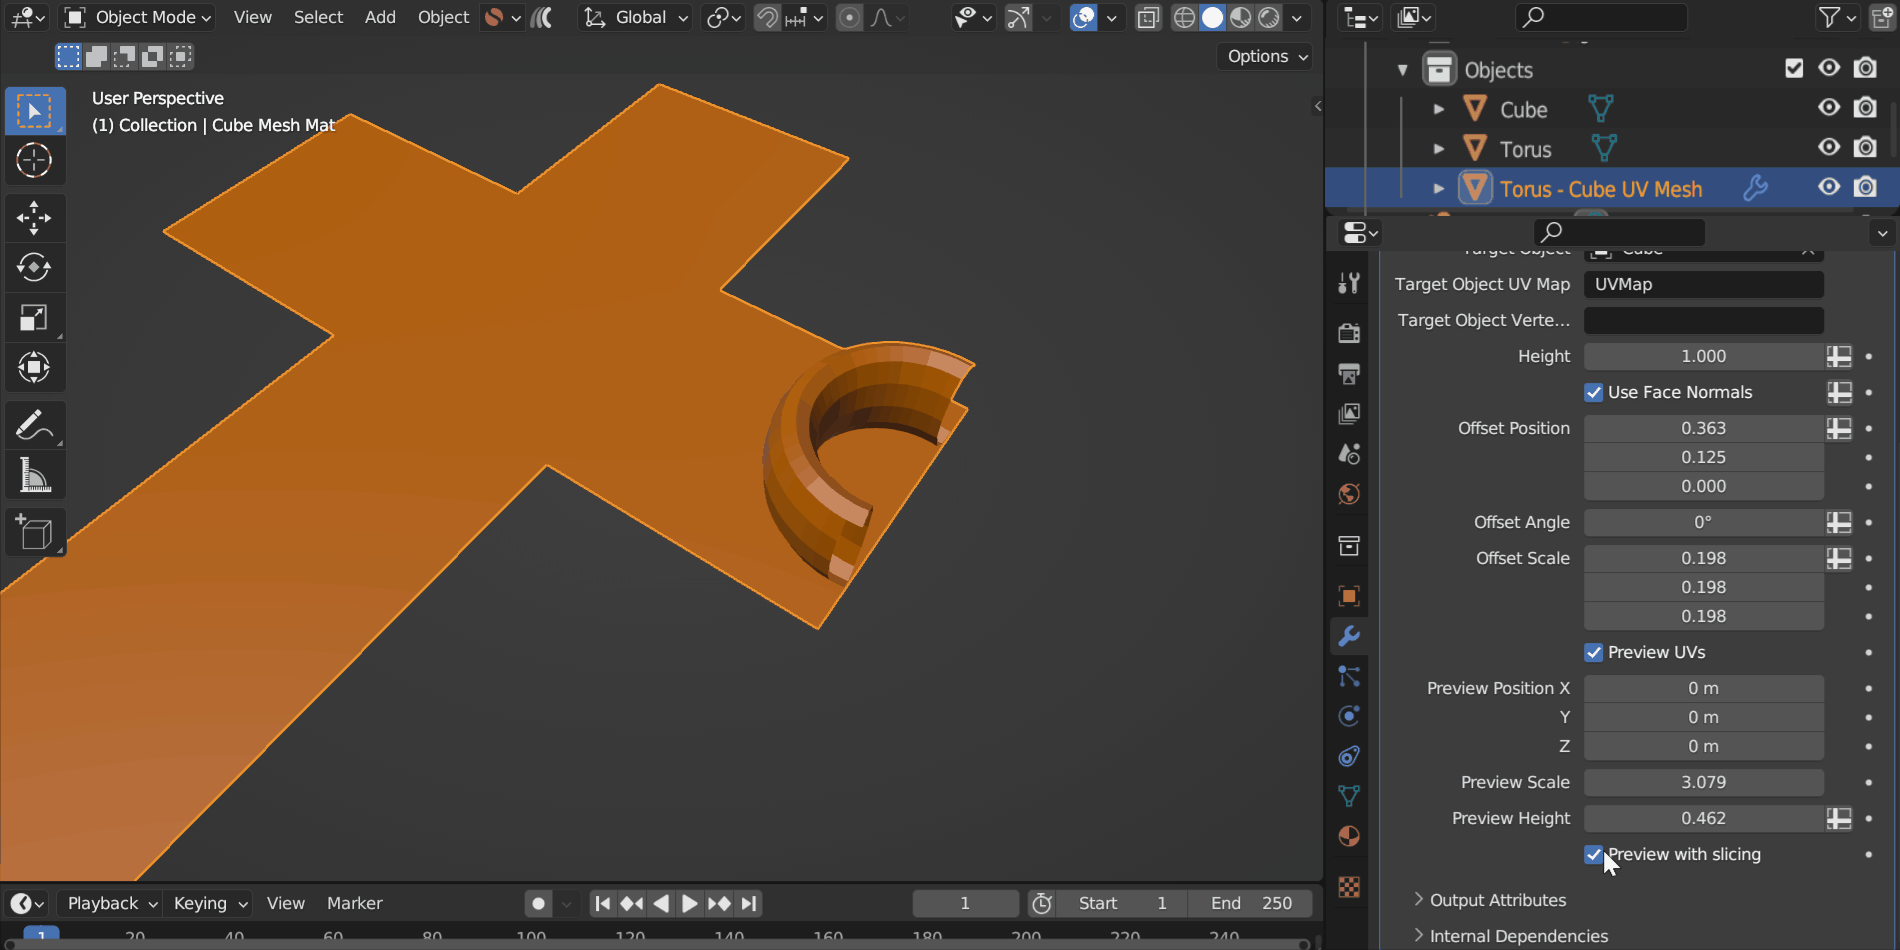 Preview UVs feature